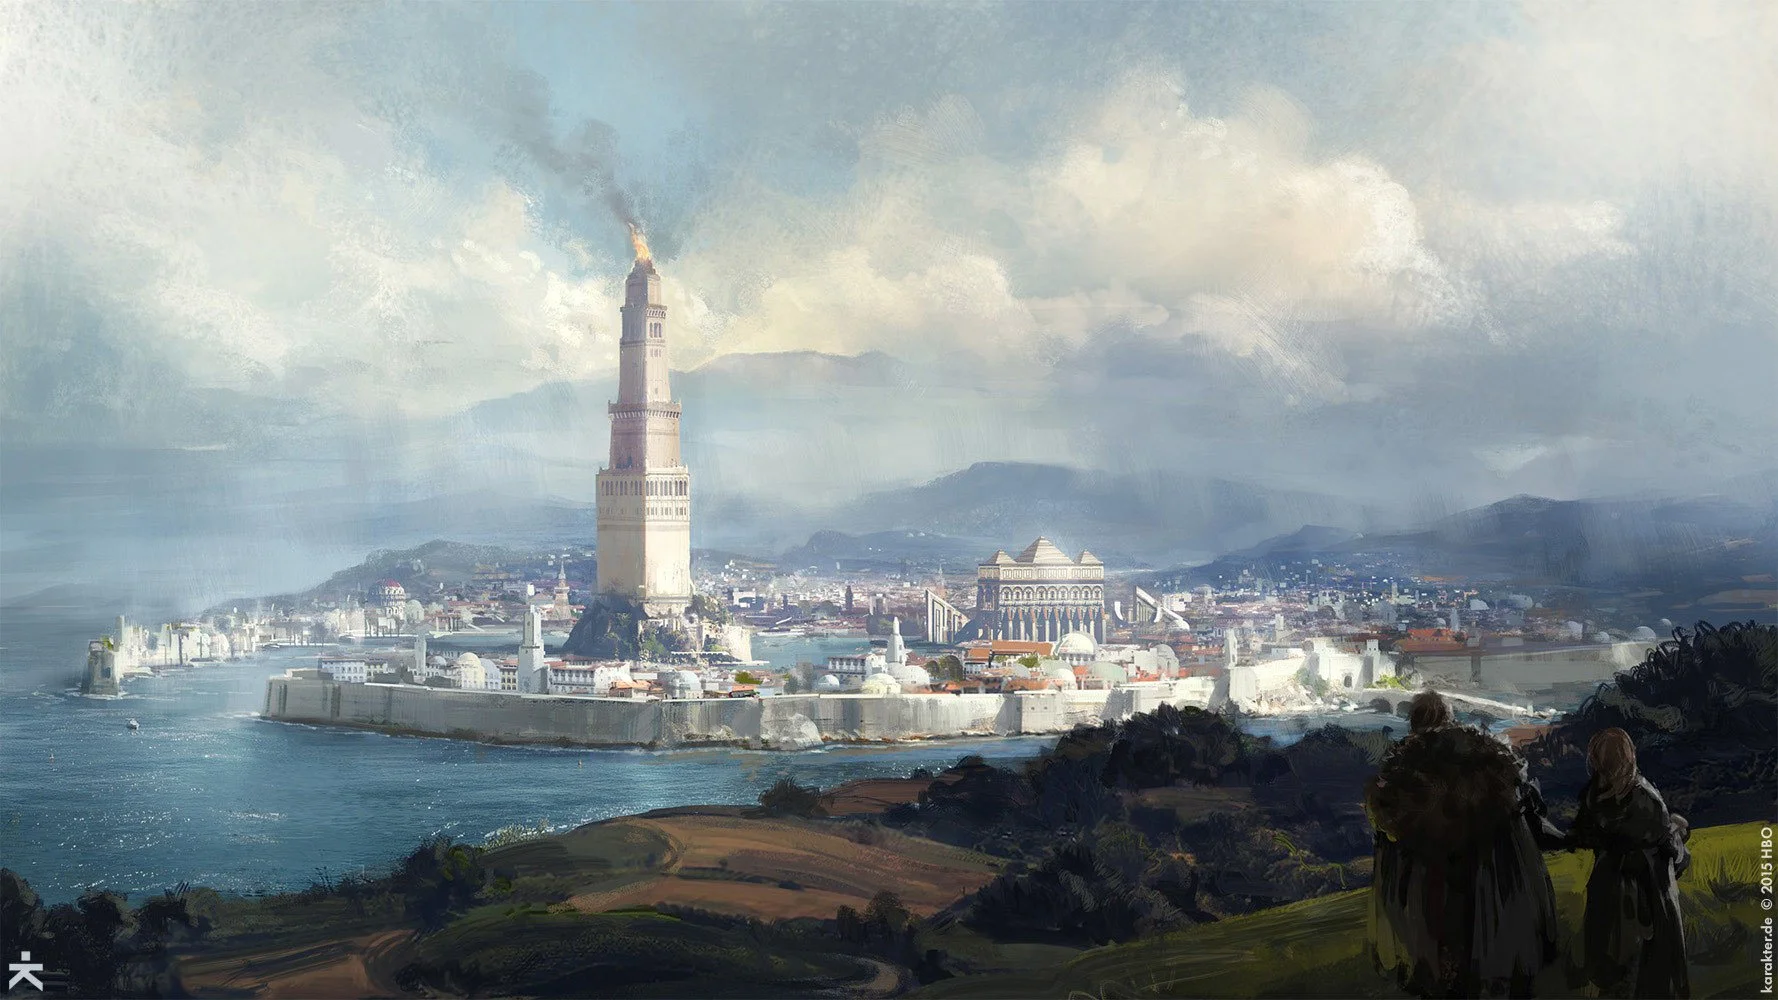 Hightower of Oldtown, as viewed by Samwell Tarly and Gilly Tarly in Game of Thrones Season 6, Episode 10 , The Winds of Winter